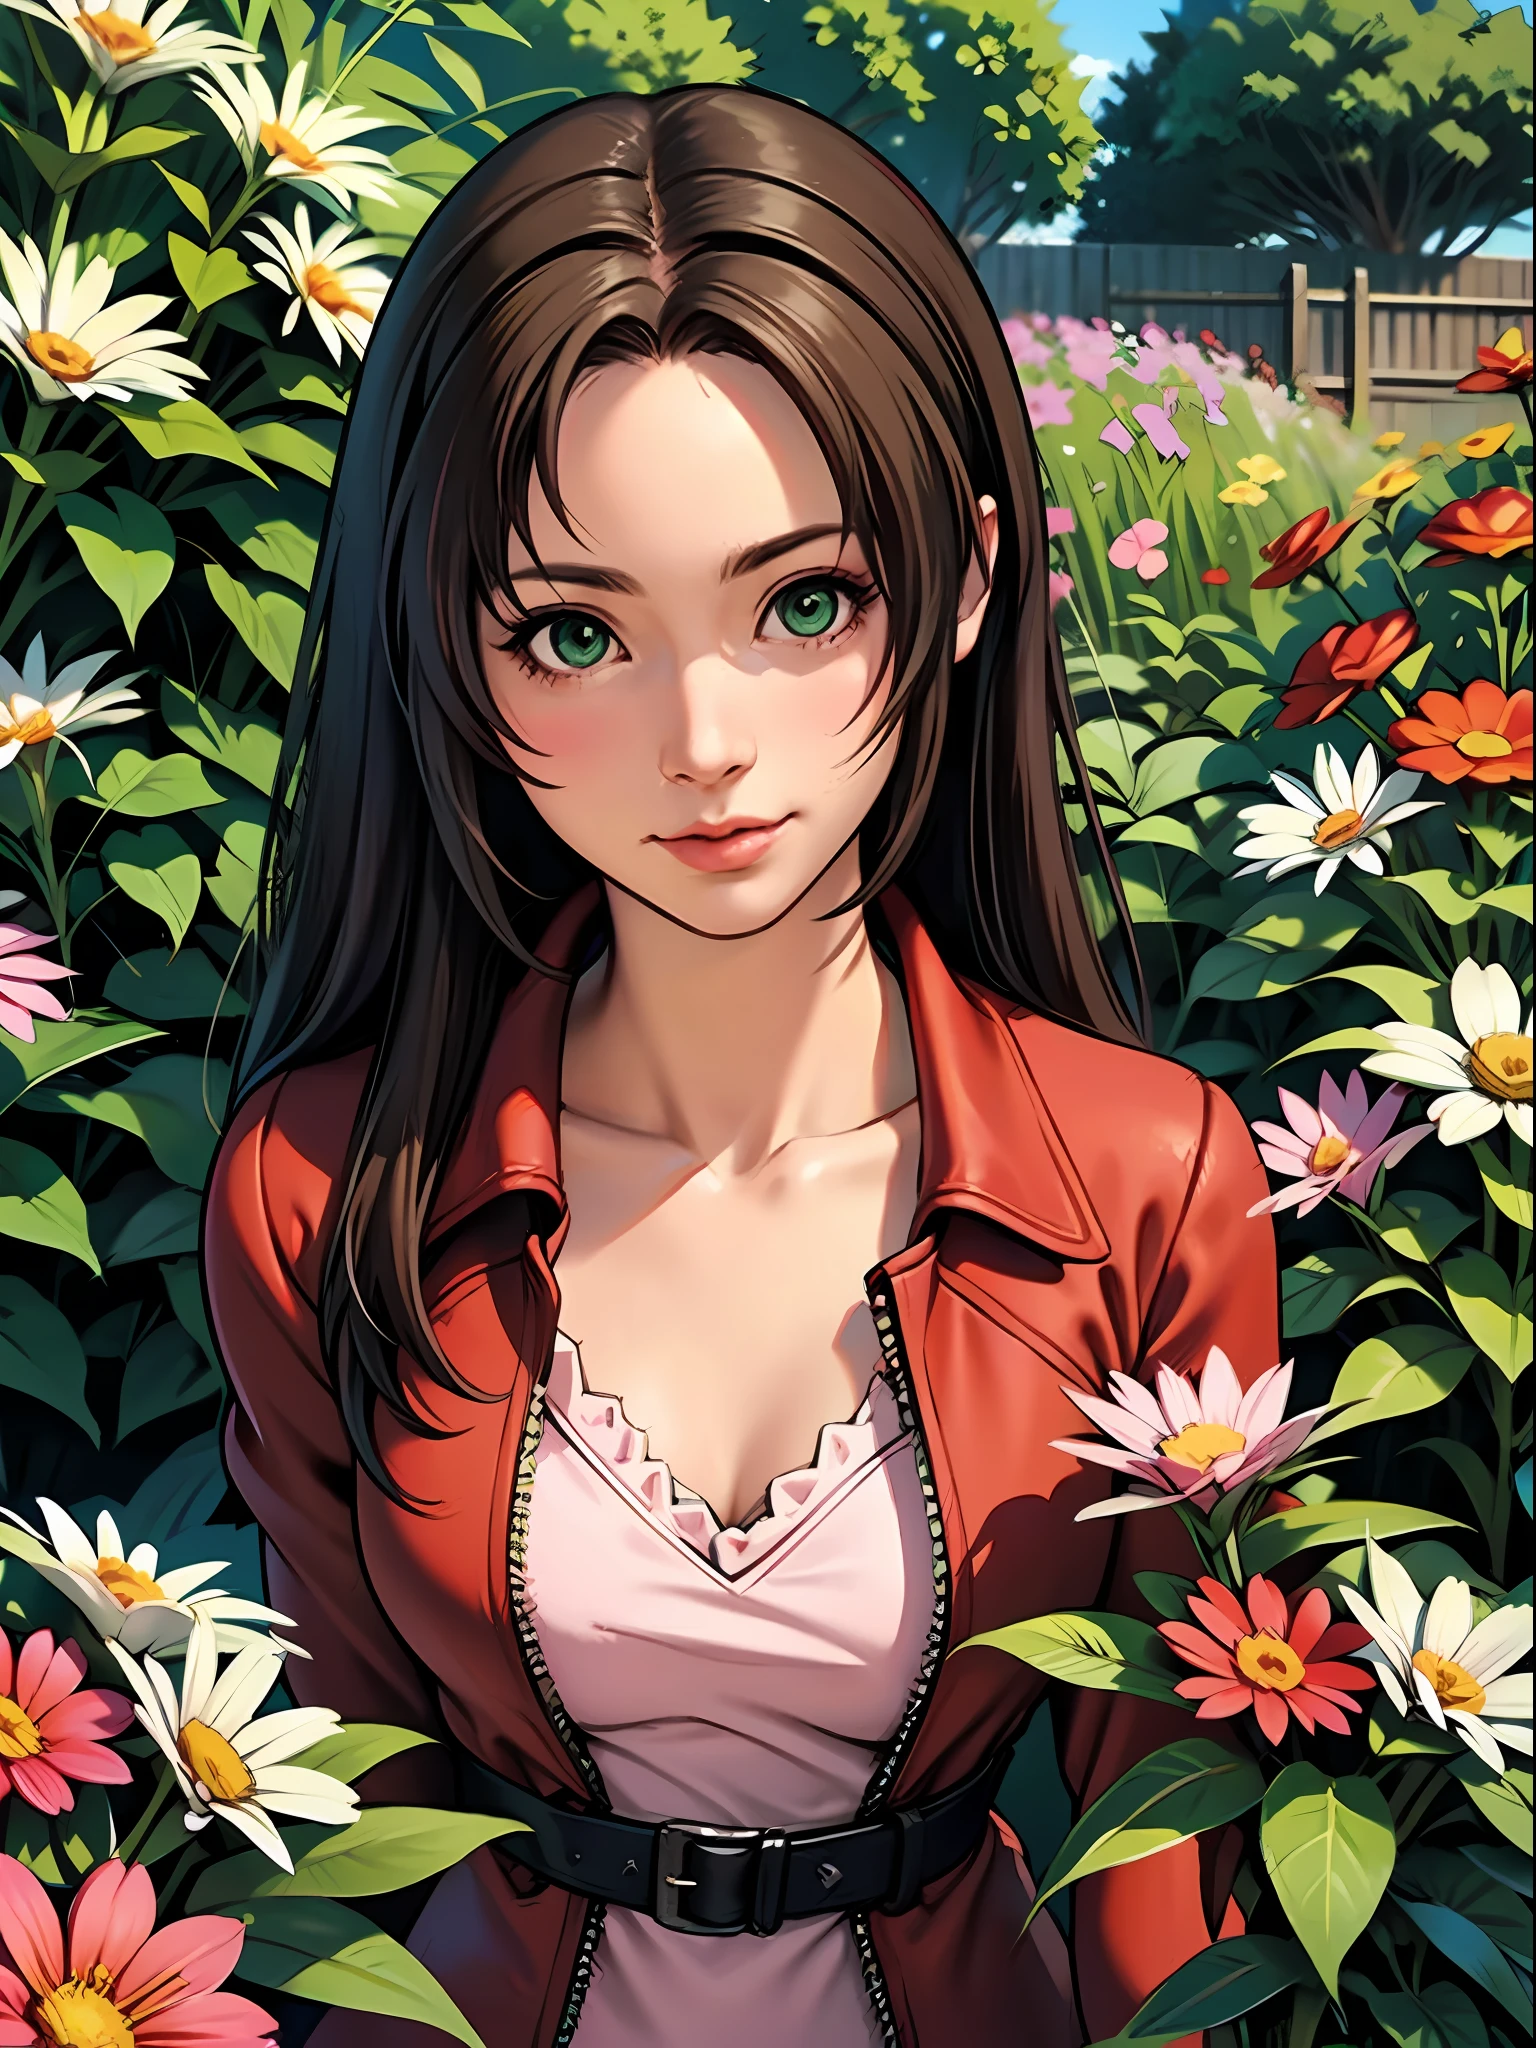 (masterpiece), best quality, narrow perspective, dutch shot, aerith gainsborough, brunette brown hair, green eyes, red jacket, pink dress, on the garden, flowers